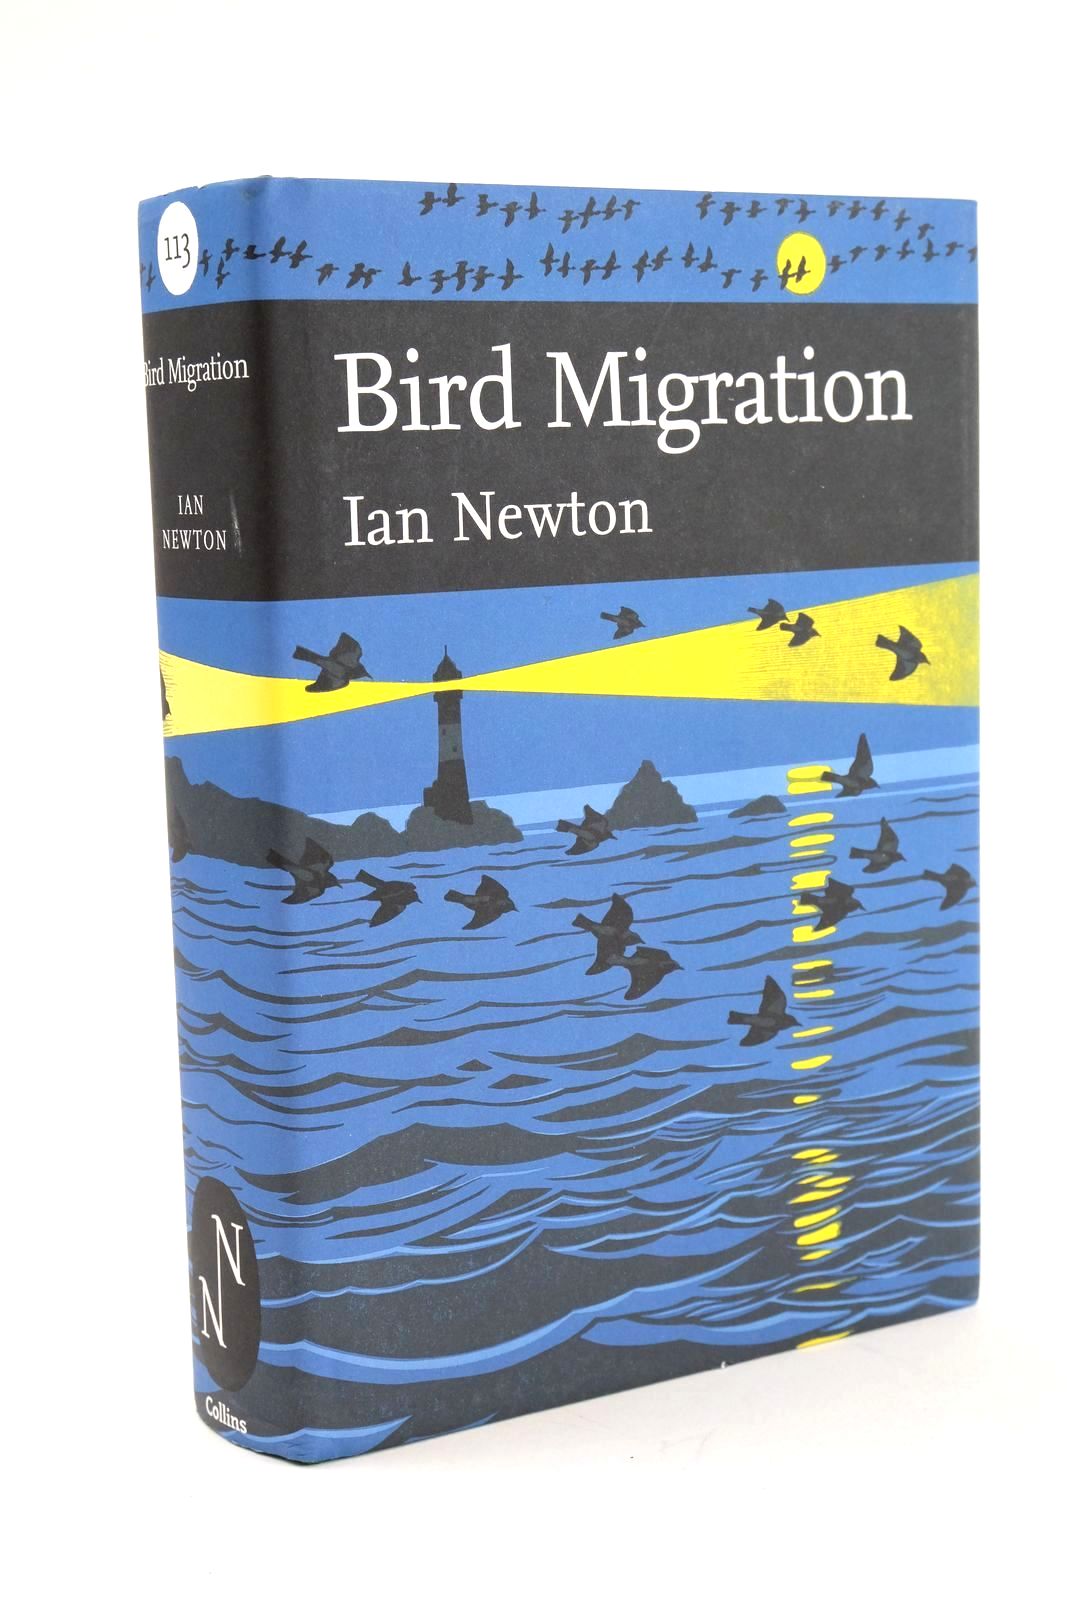 Photo of BIRD MIGRATION (NN 113) written by Newton, Ian published by Collins (STOCK CODE: 1324820)  for sale by Stella & Rose's Books